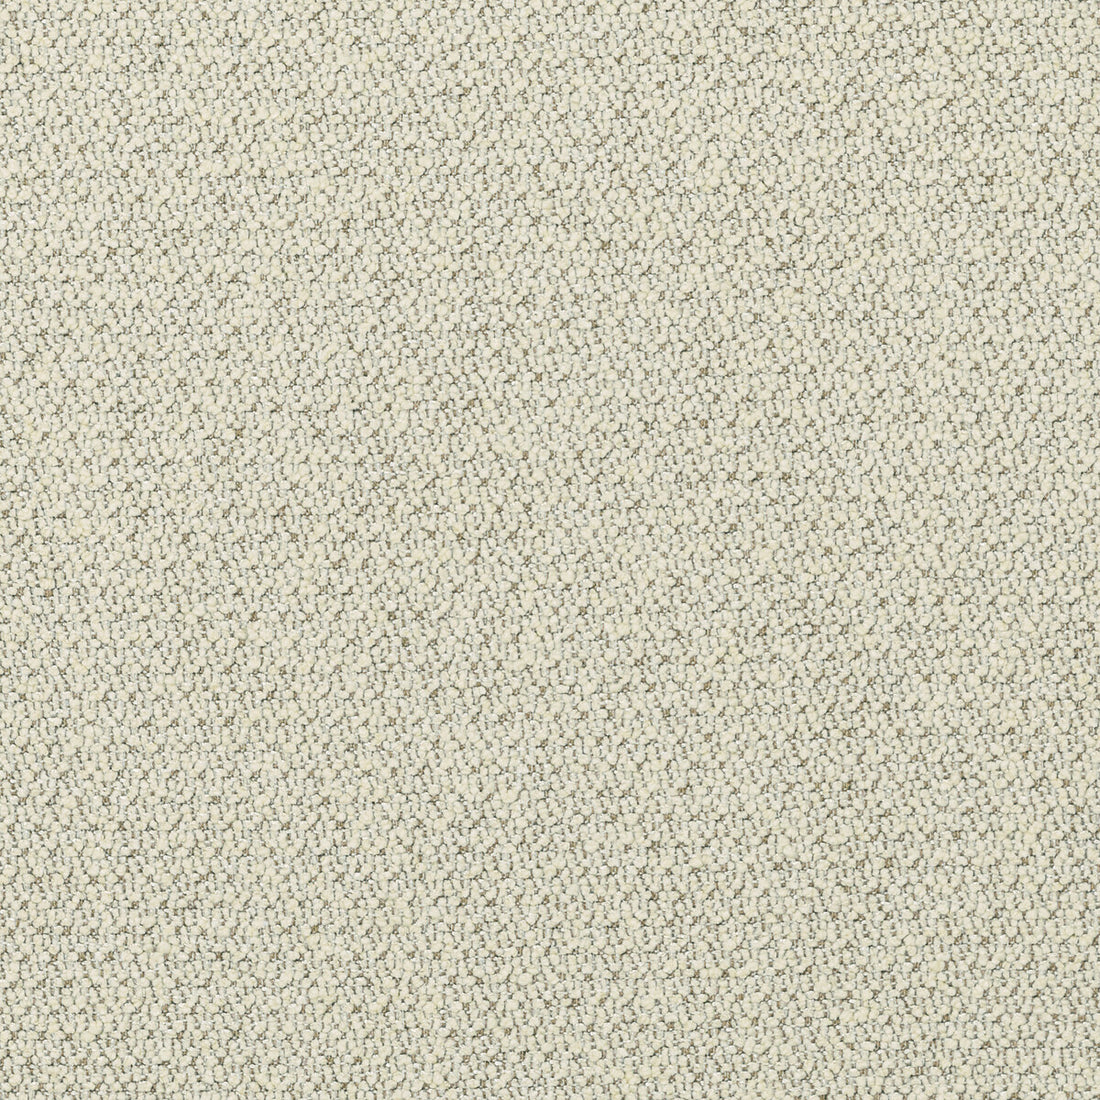 Bali Boucle fabric in sand color - pattern 36051.116.0 - by Kravet Couture in the Luxury Textures II collection